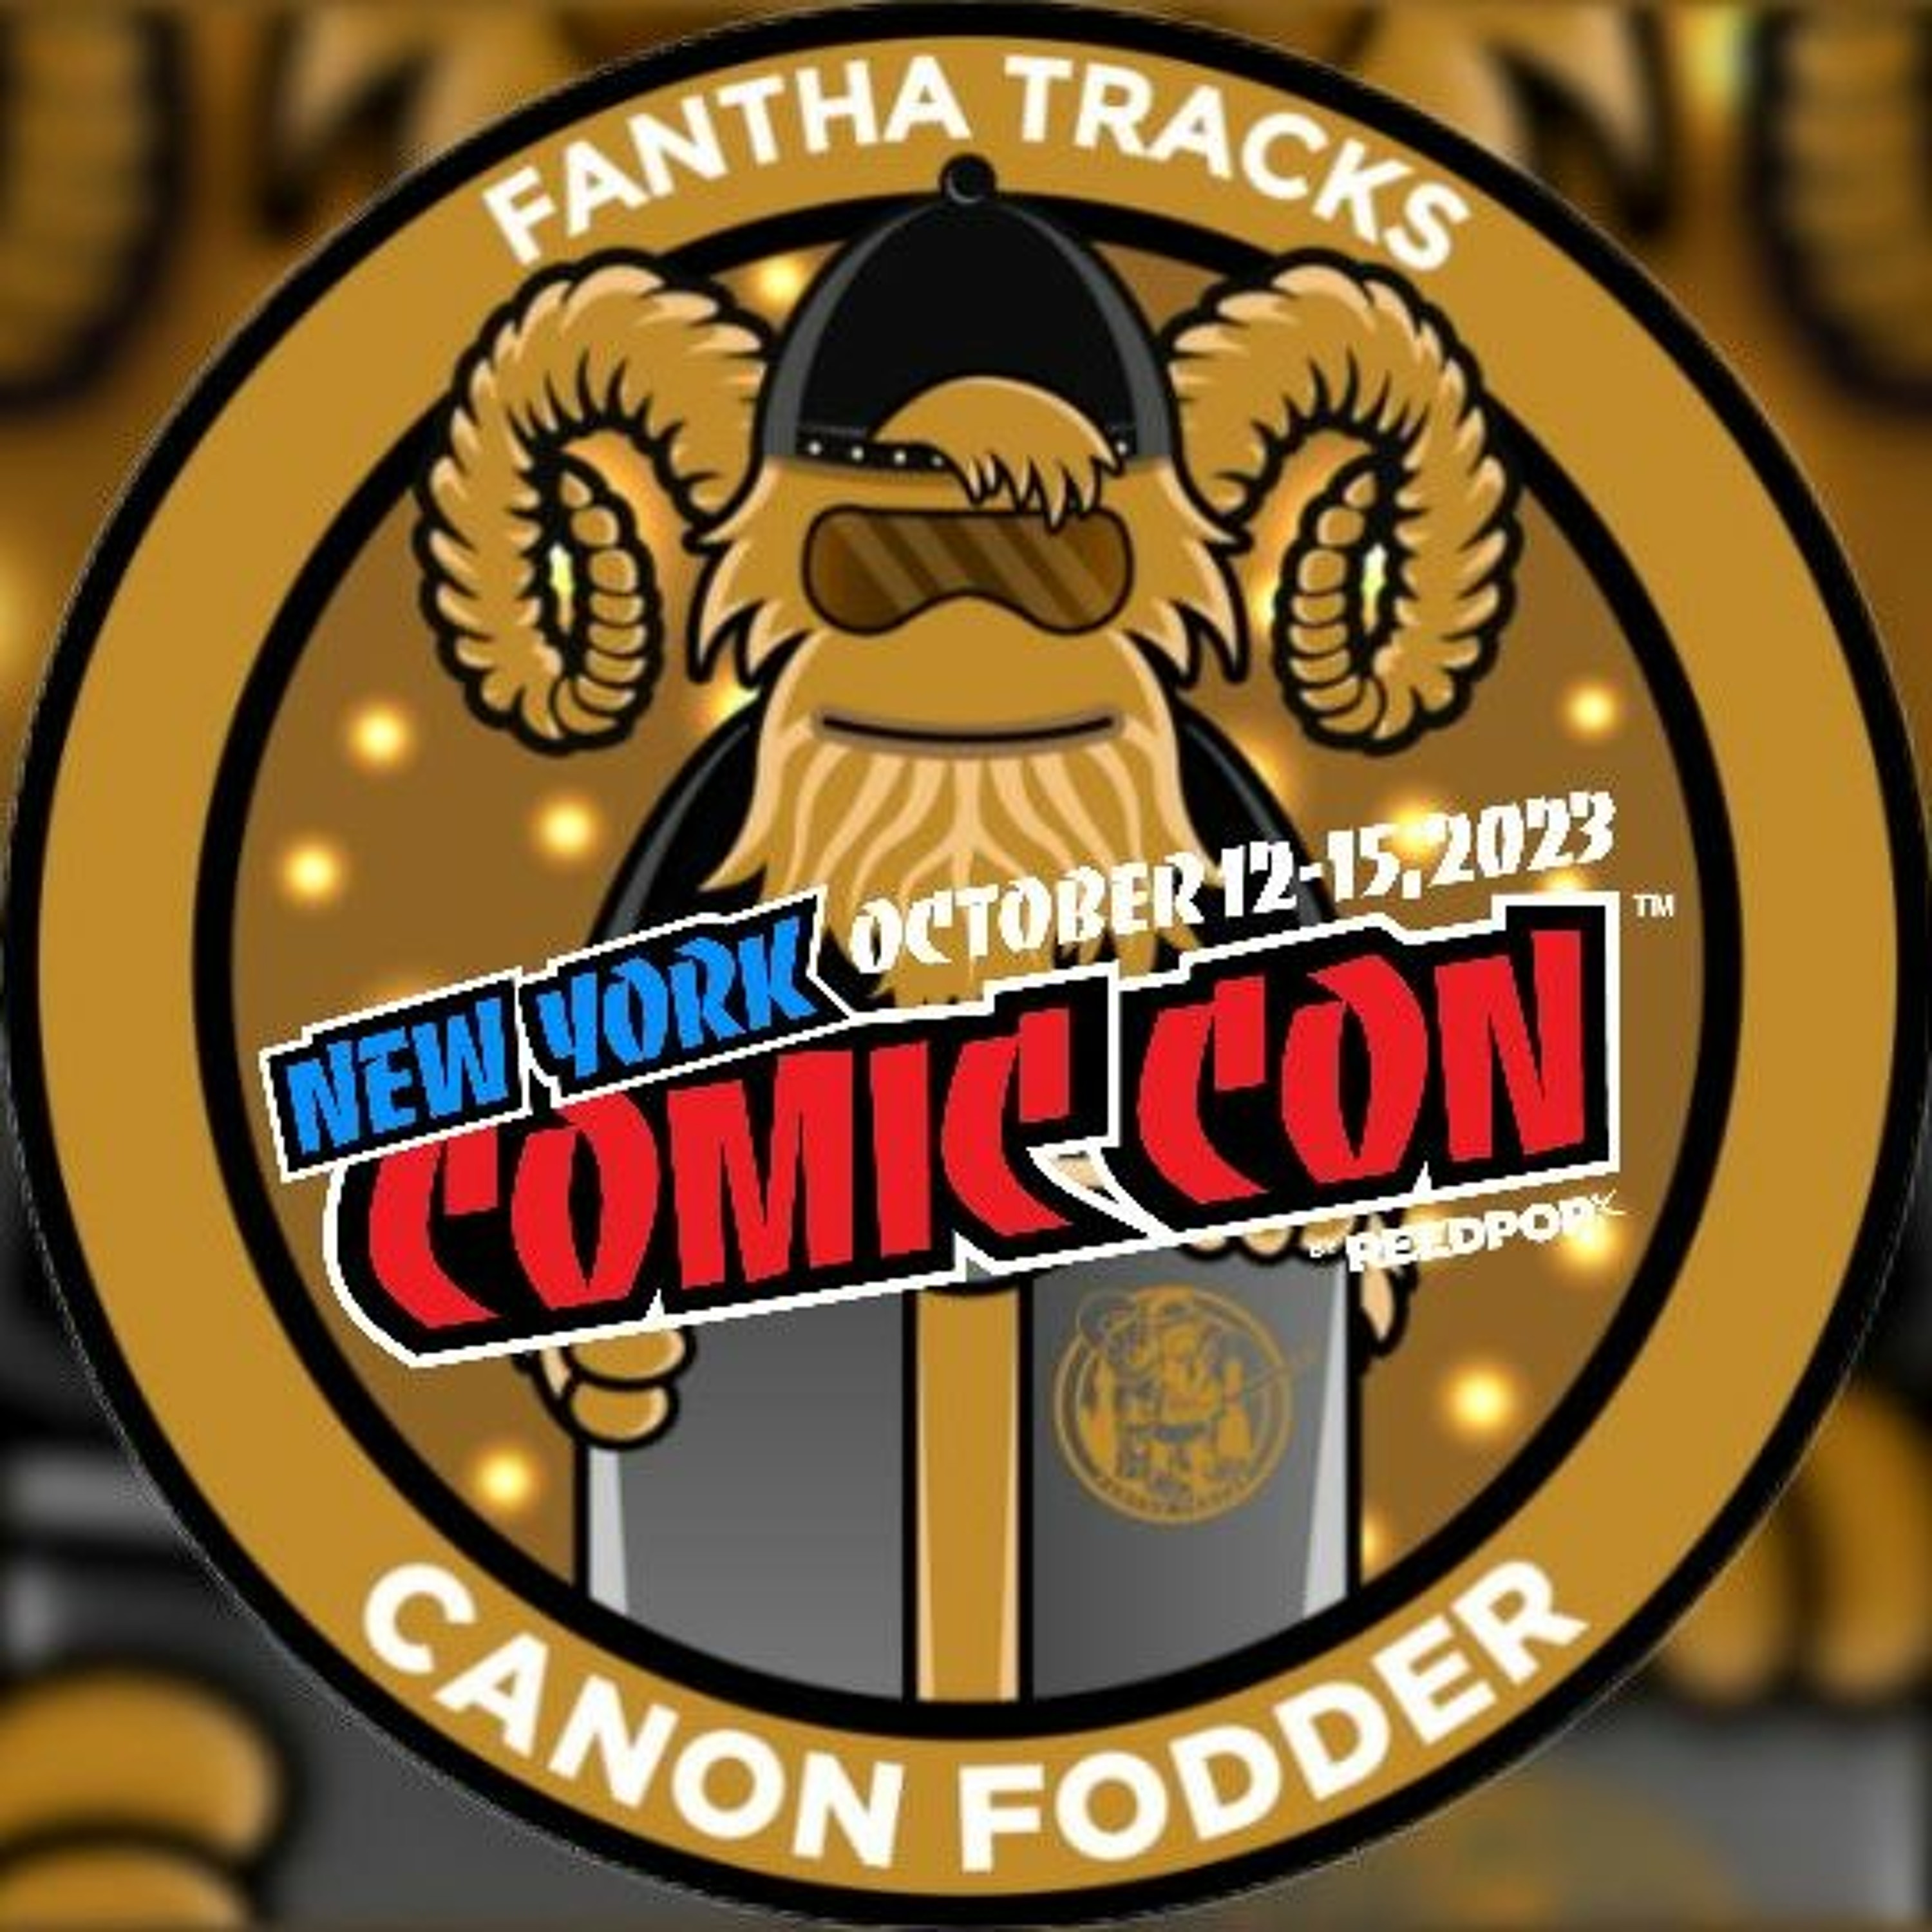 Canon Fodder at New York Comic Con 2023: Star Wars: Stories From A Galaxy Far, Far Away…panel